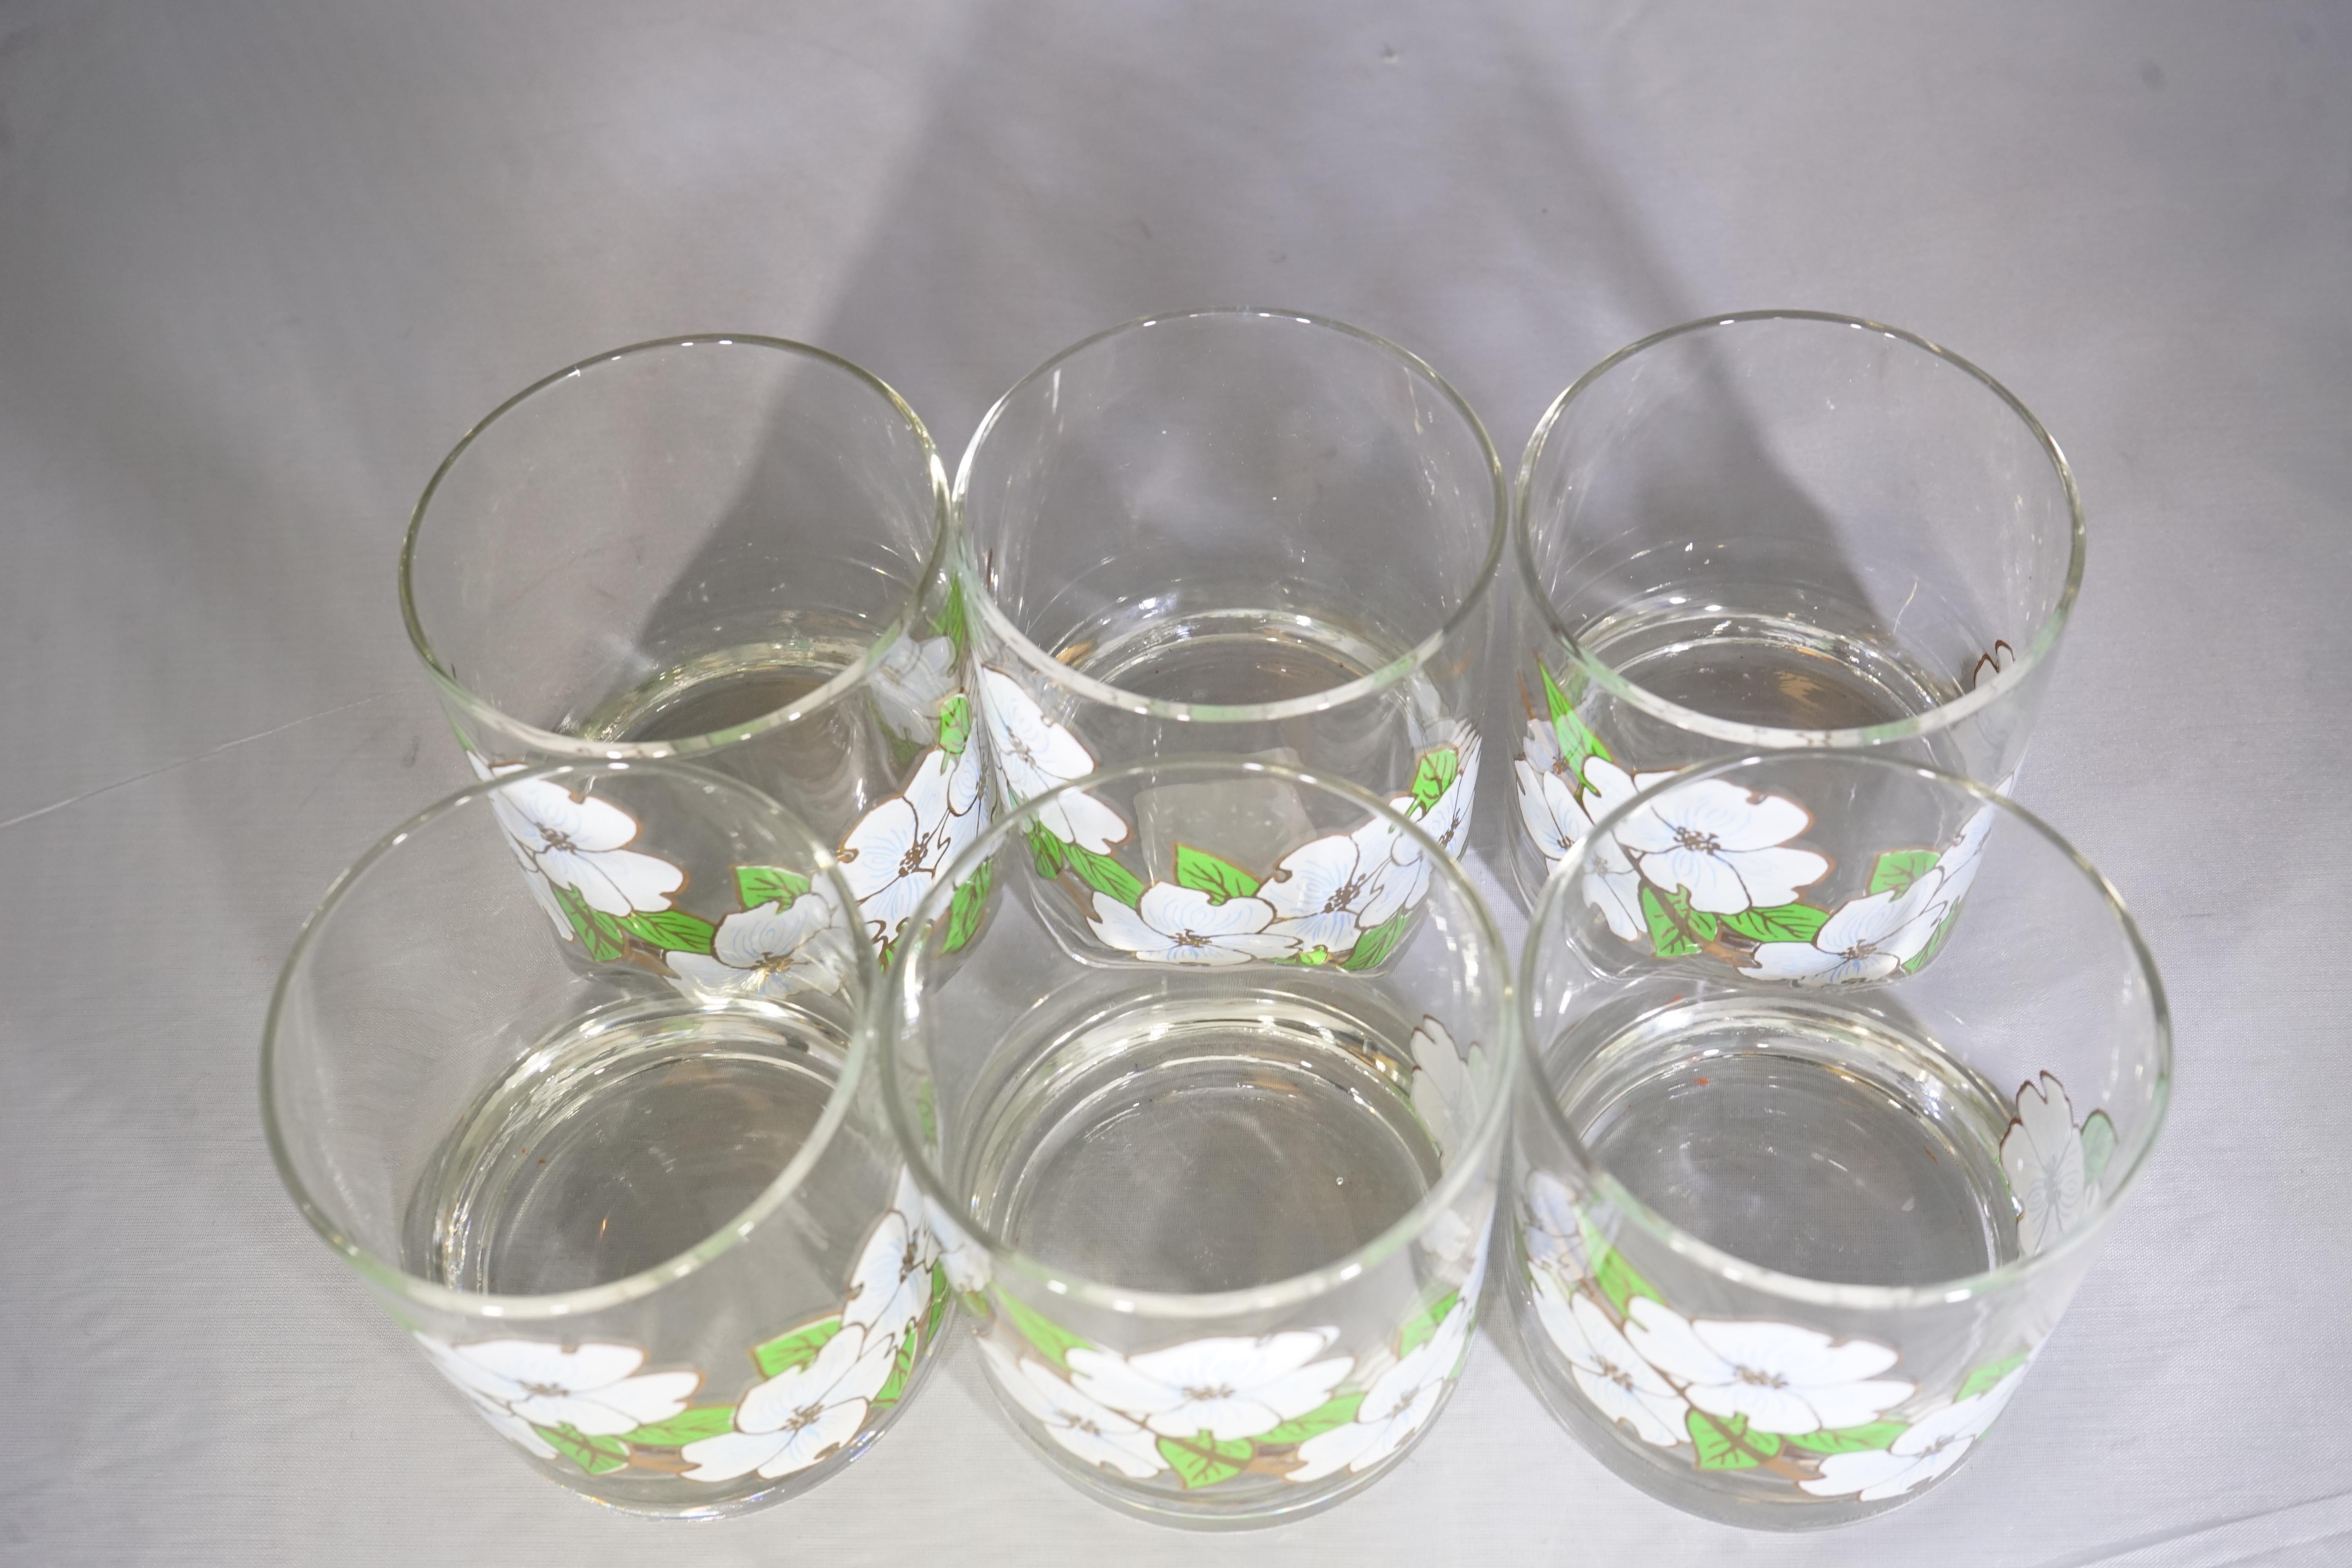 Set of six vintage Couroc unique rock glasses featuring painted dogwood blossoms design with white flowers and green leaves.